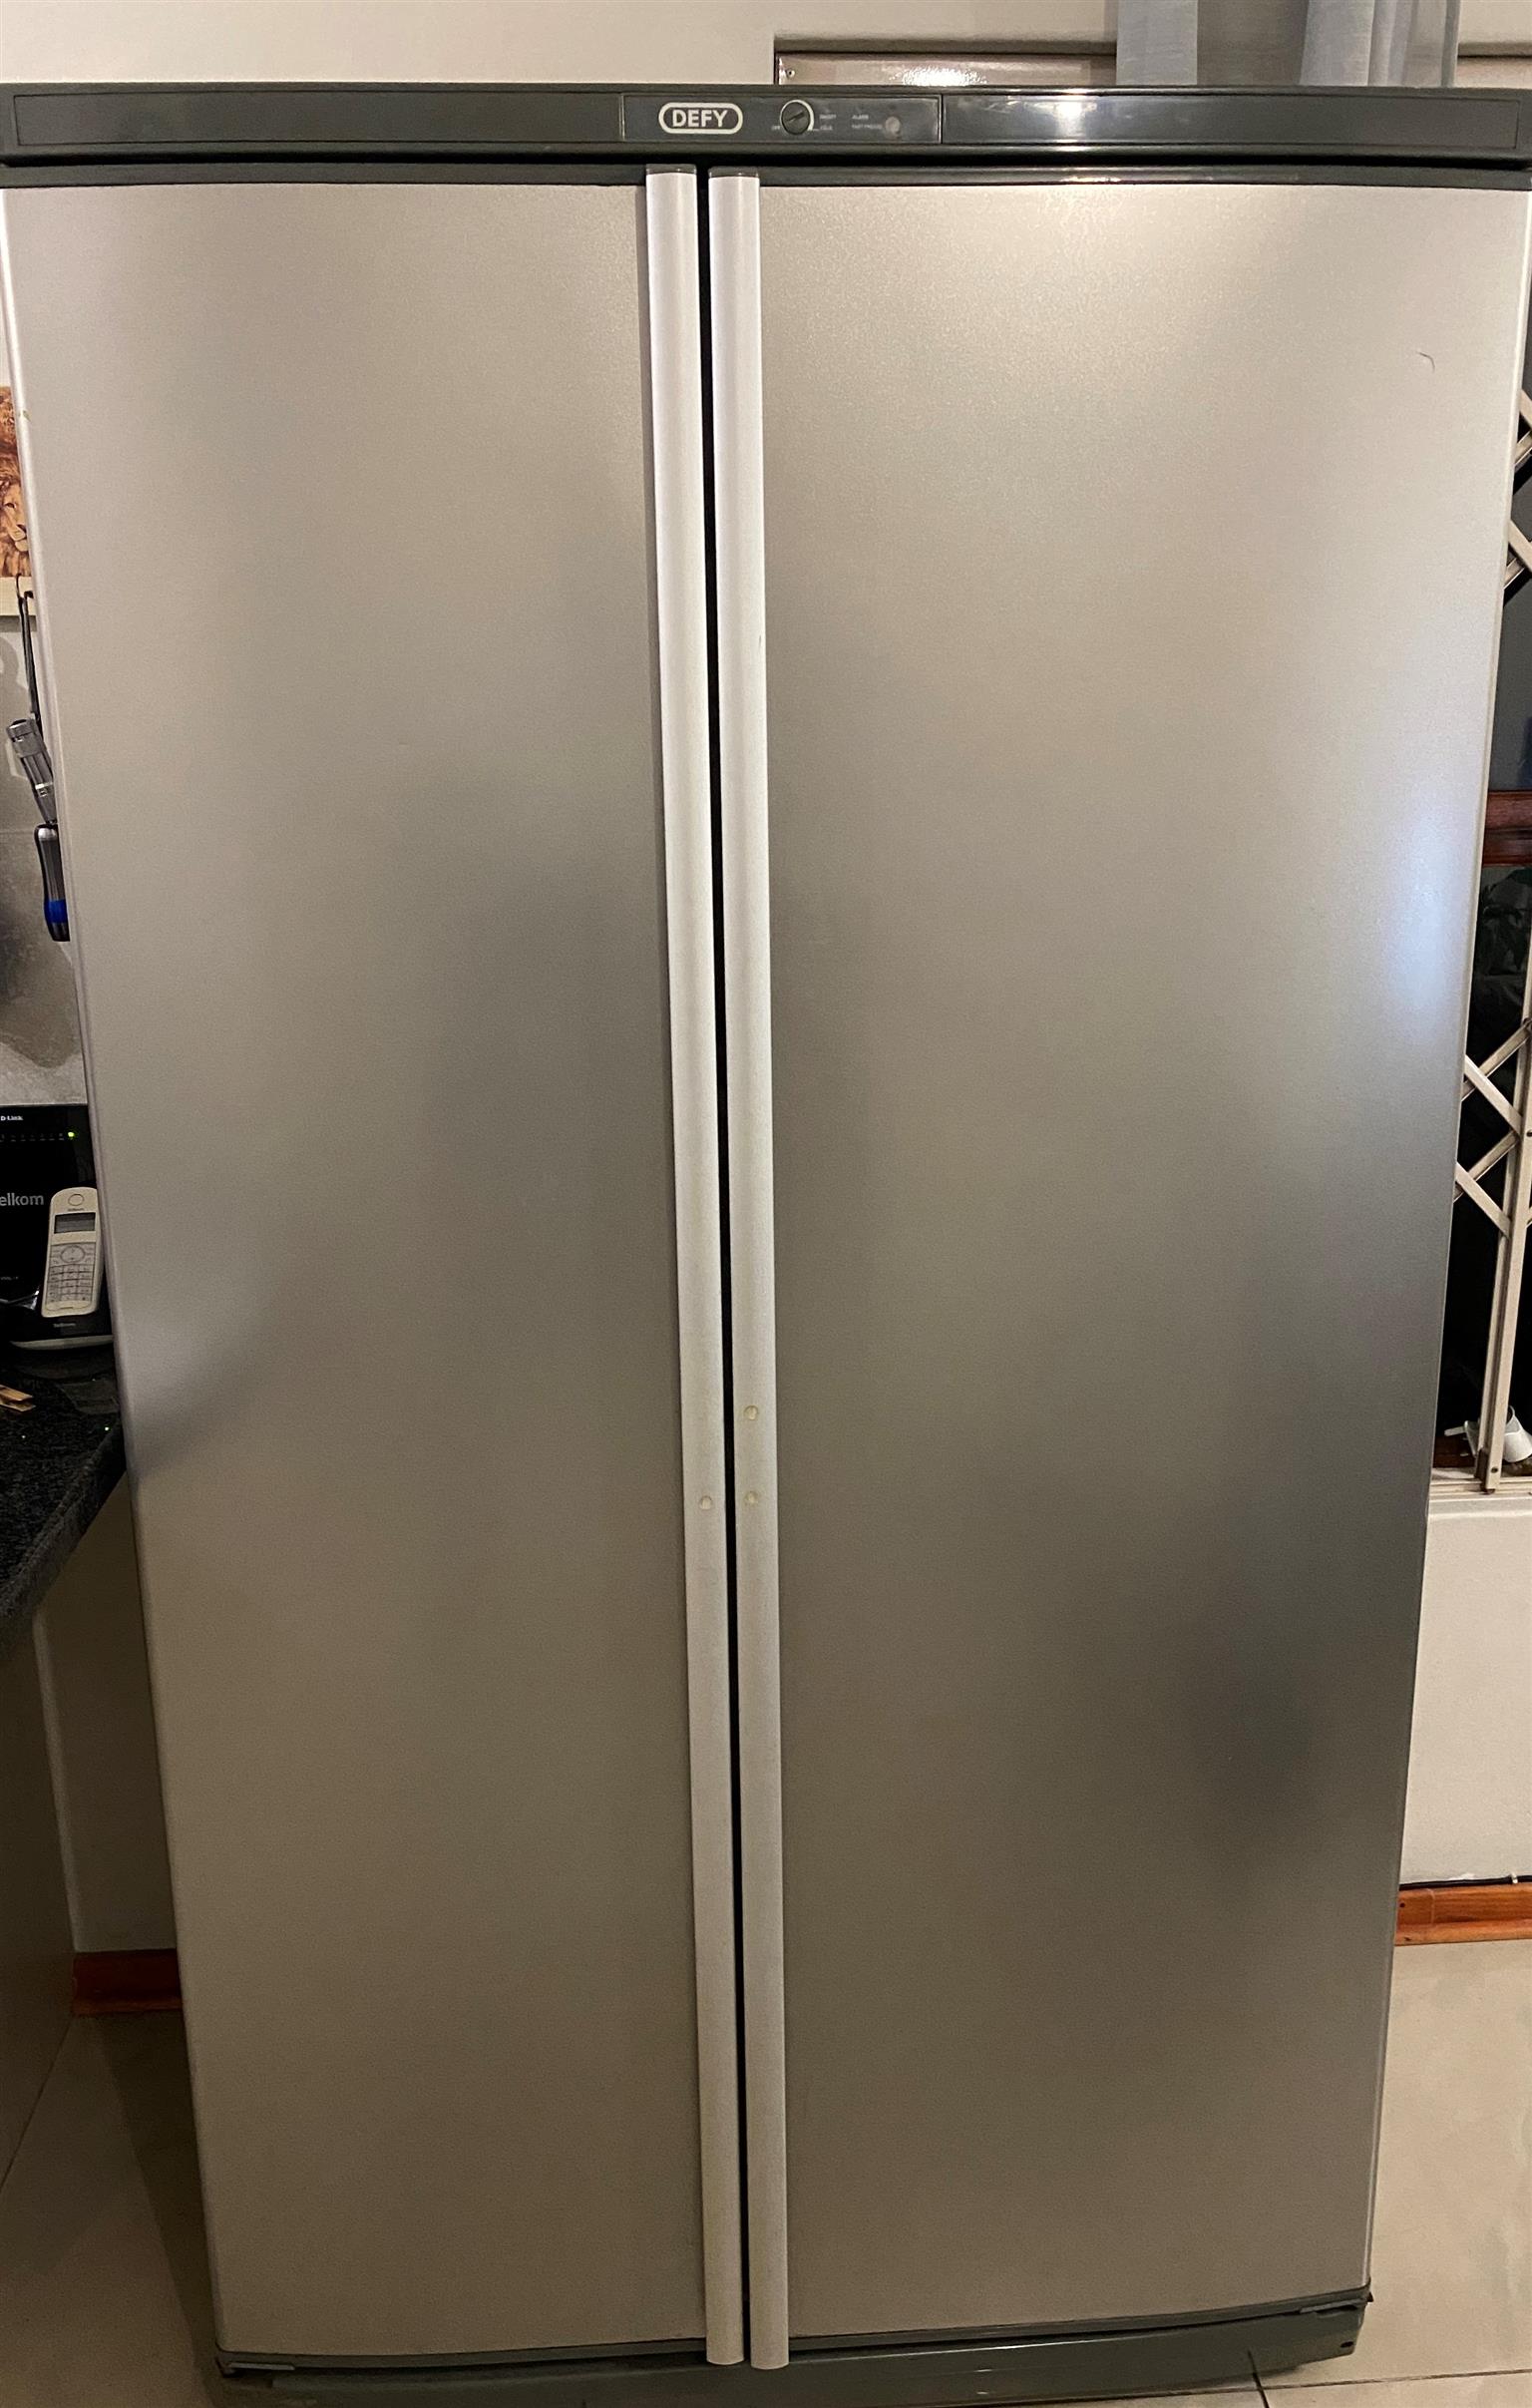 DEFY side-by side fridge/freezer for sale-good condition